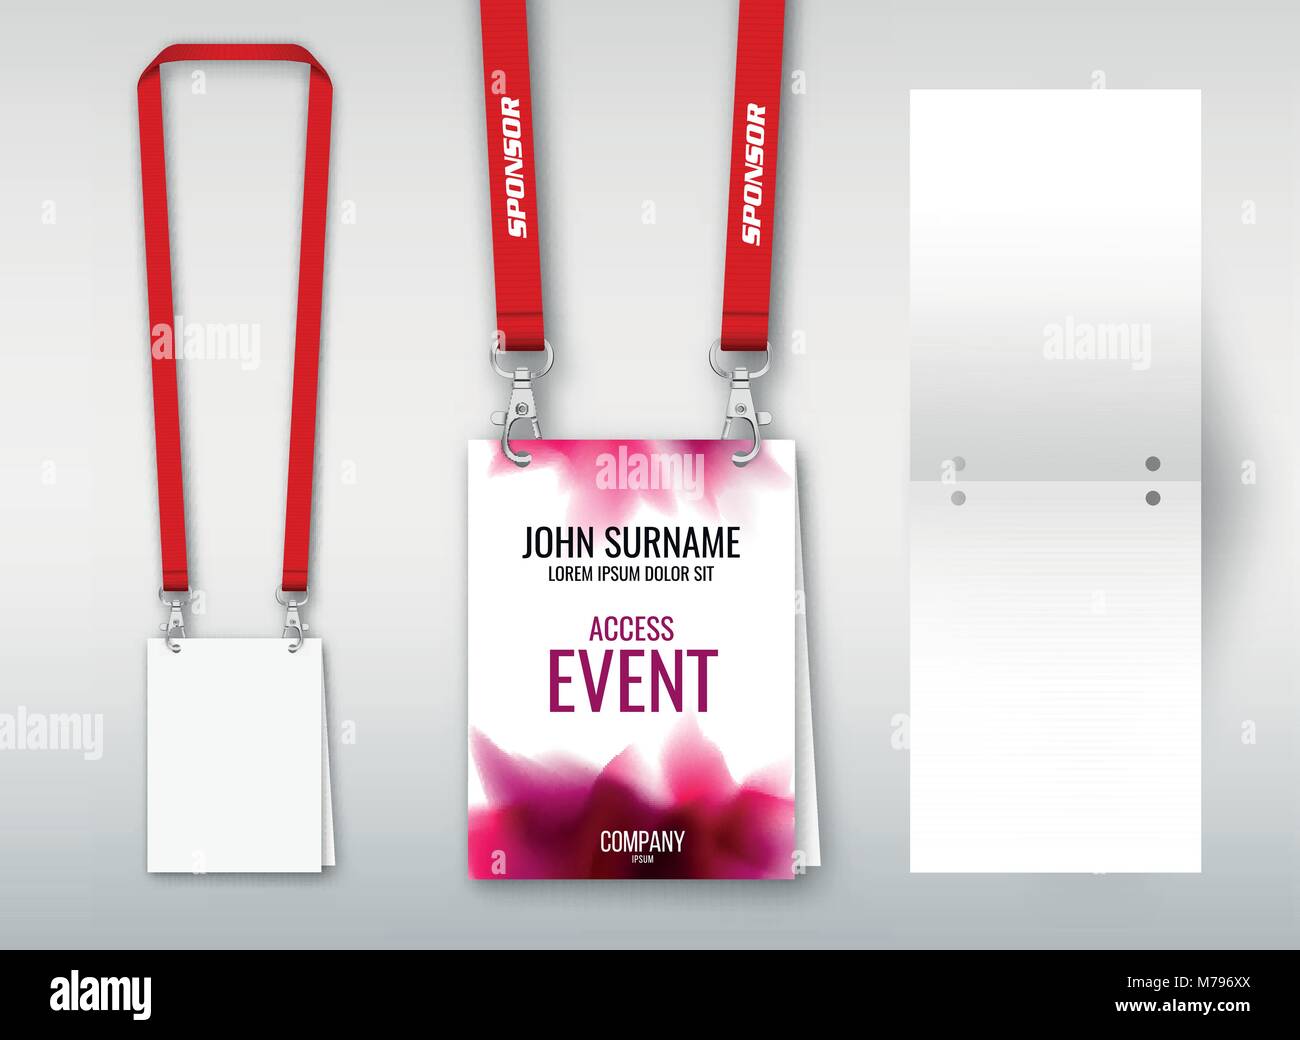 Design of double hole lanyard. Example with double program card. Access ID for congresses, events, fairs, exhibitions. Vector illustration of lanyard. Stock Vector